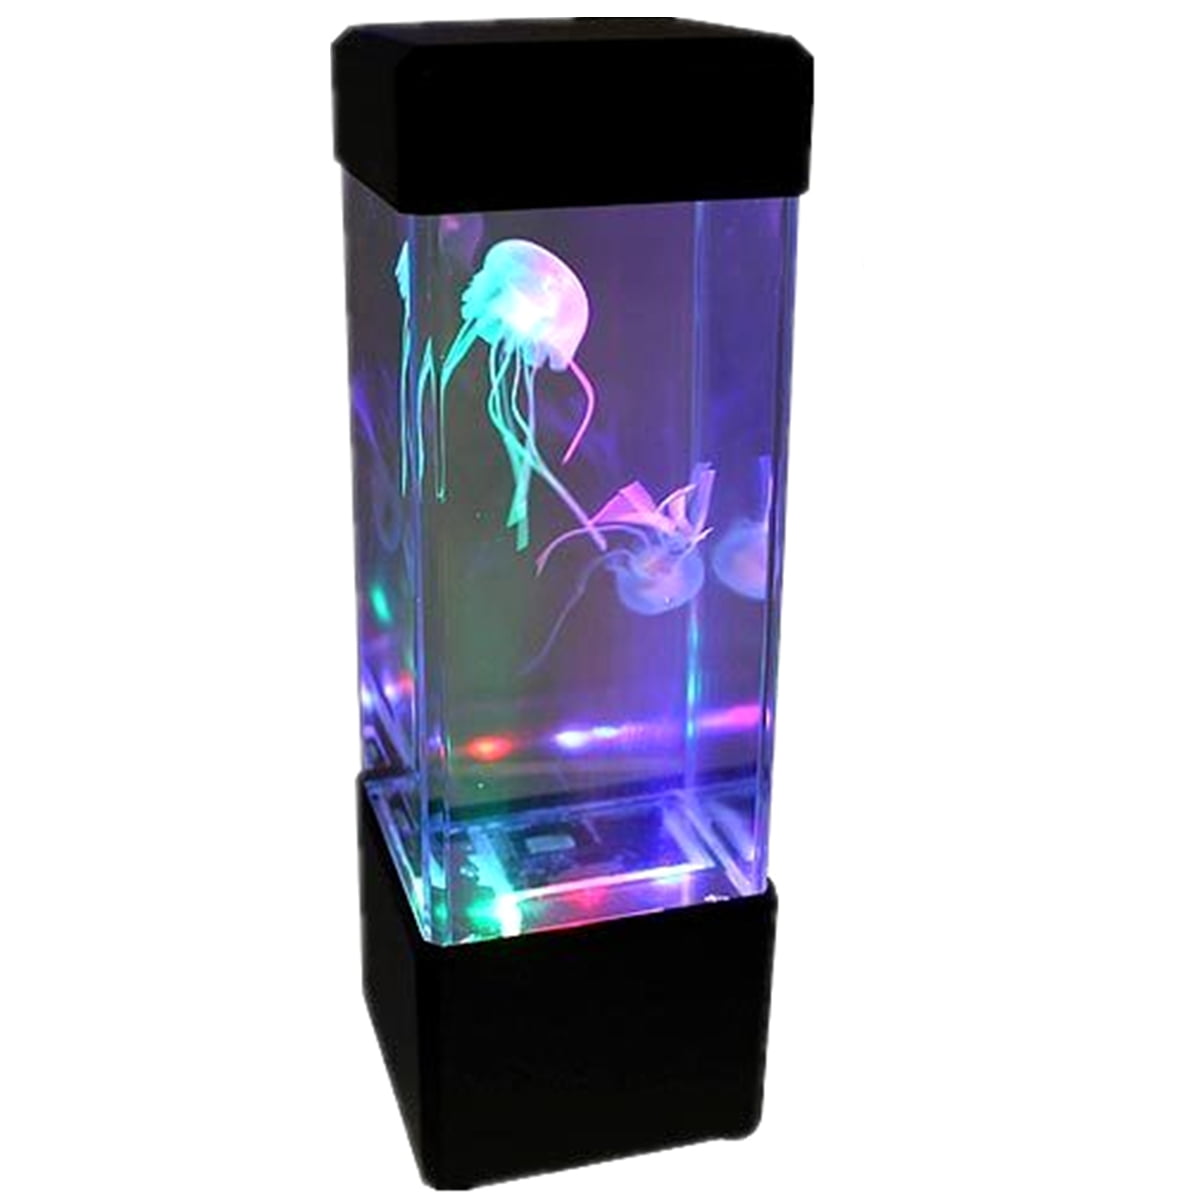 Jellyfish Water Aquarium Tank LED Lamp Relax Bedside Mood Light for Home D 